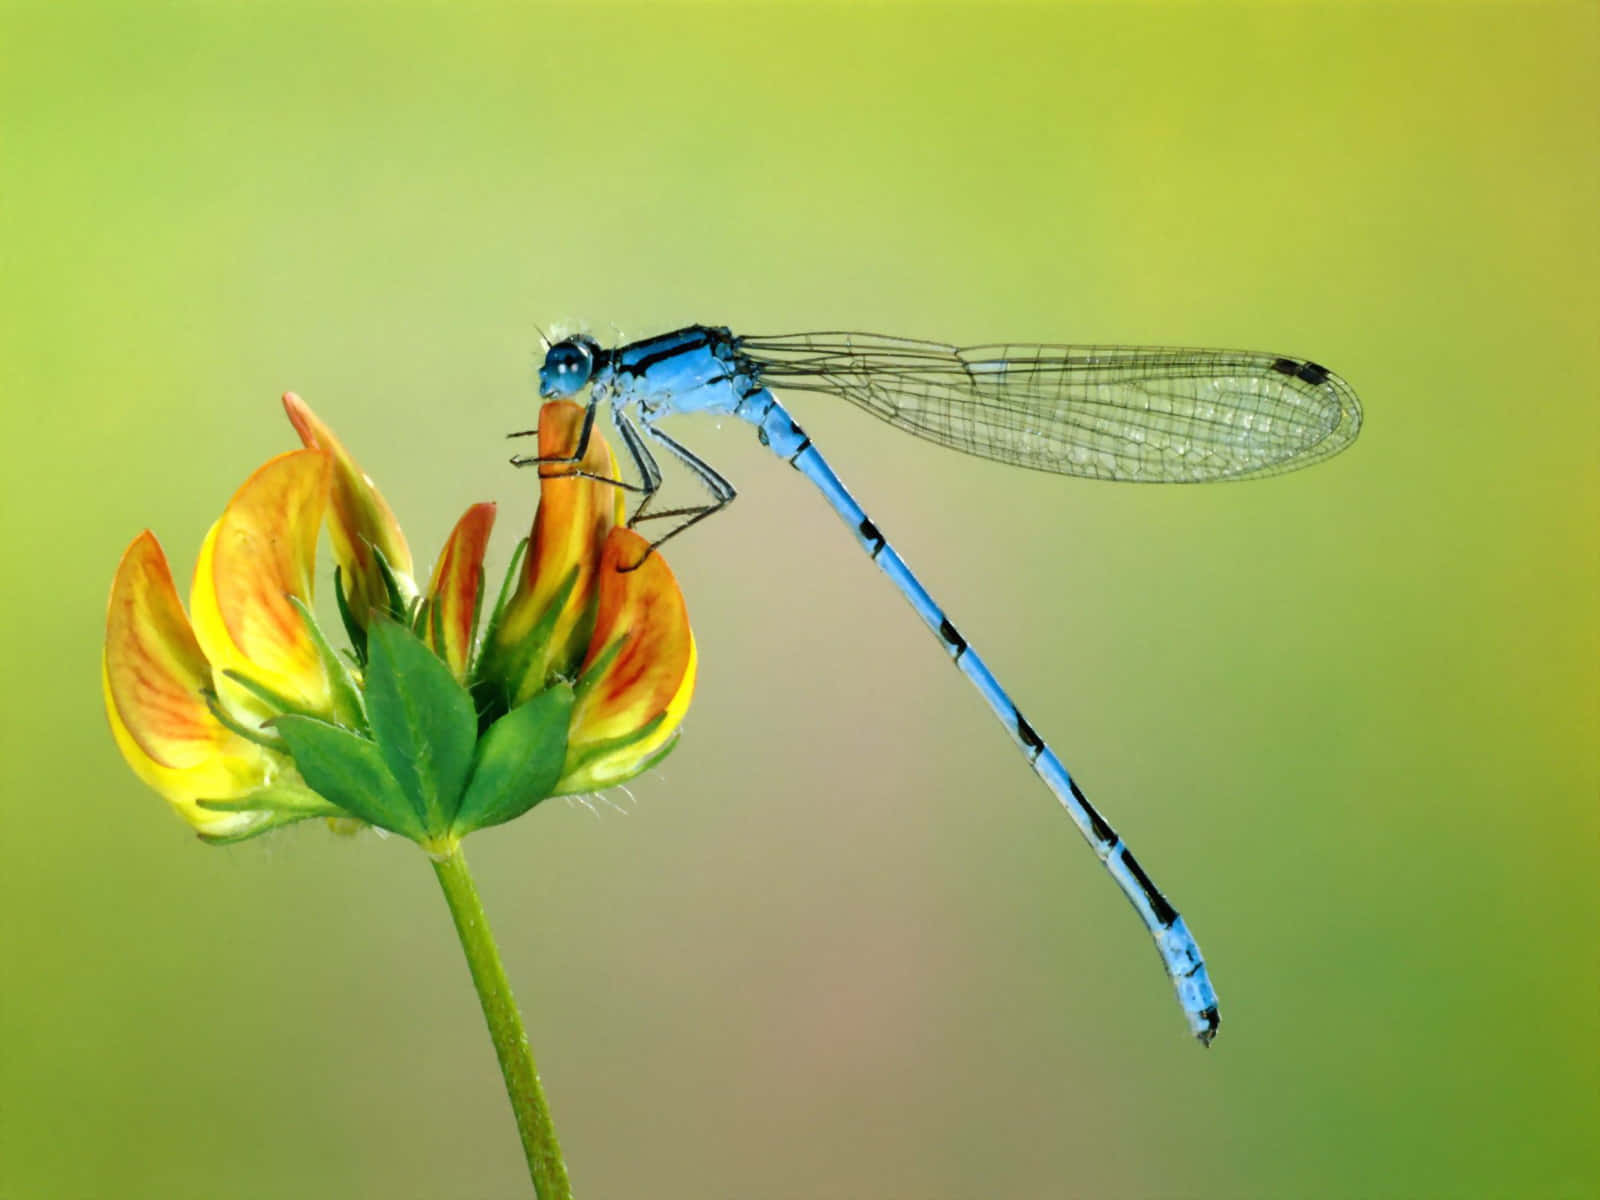 Insects Named Azure damselfly Wallpaper